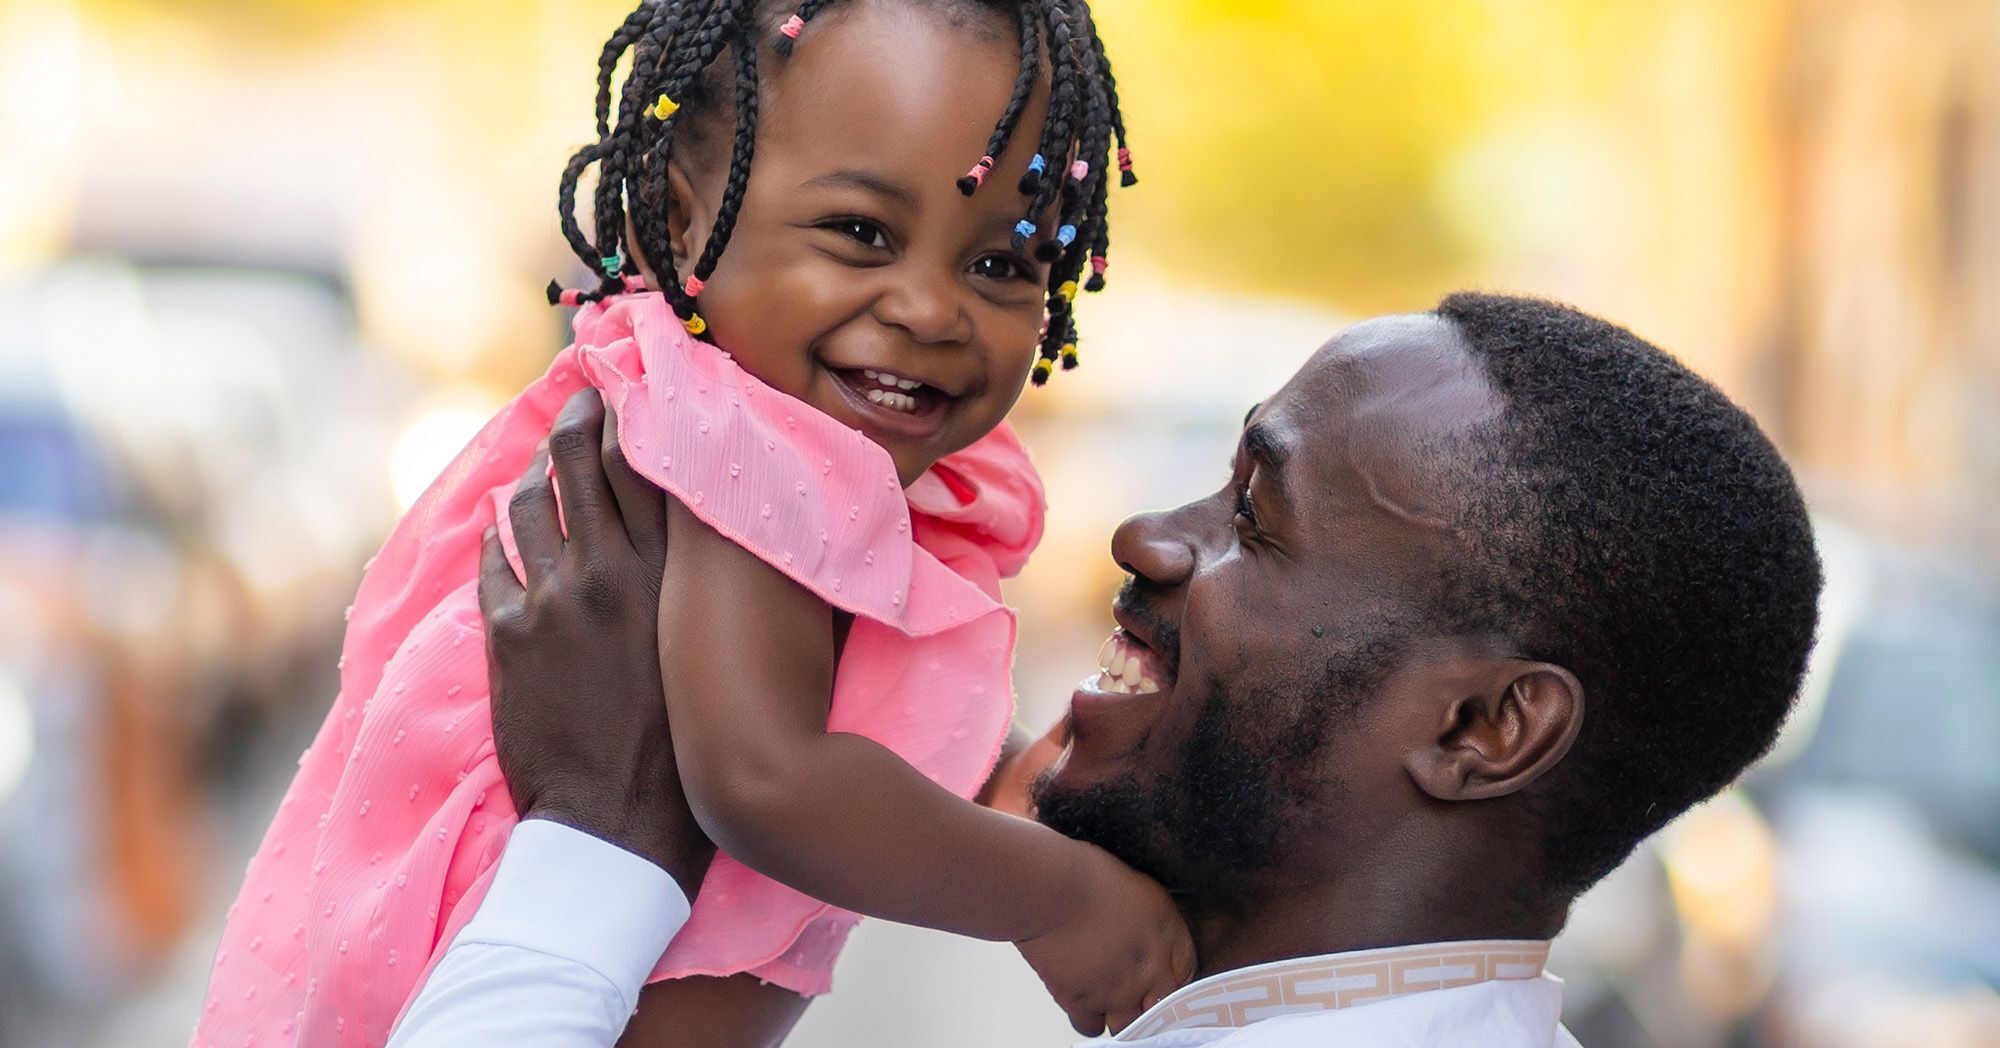 aftrican american man lifting a smiling african american baby girl